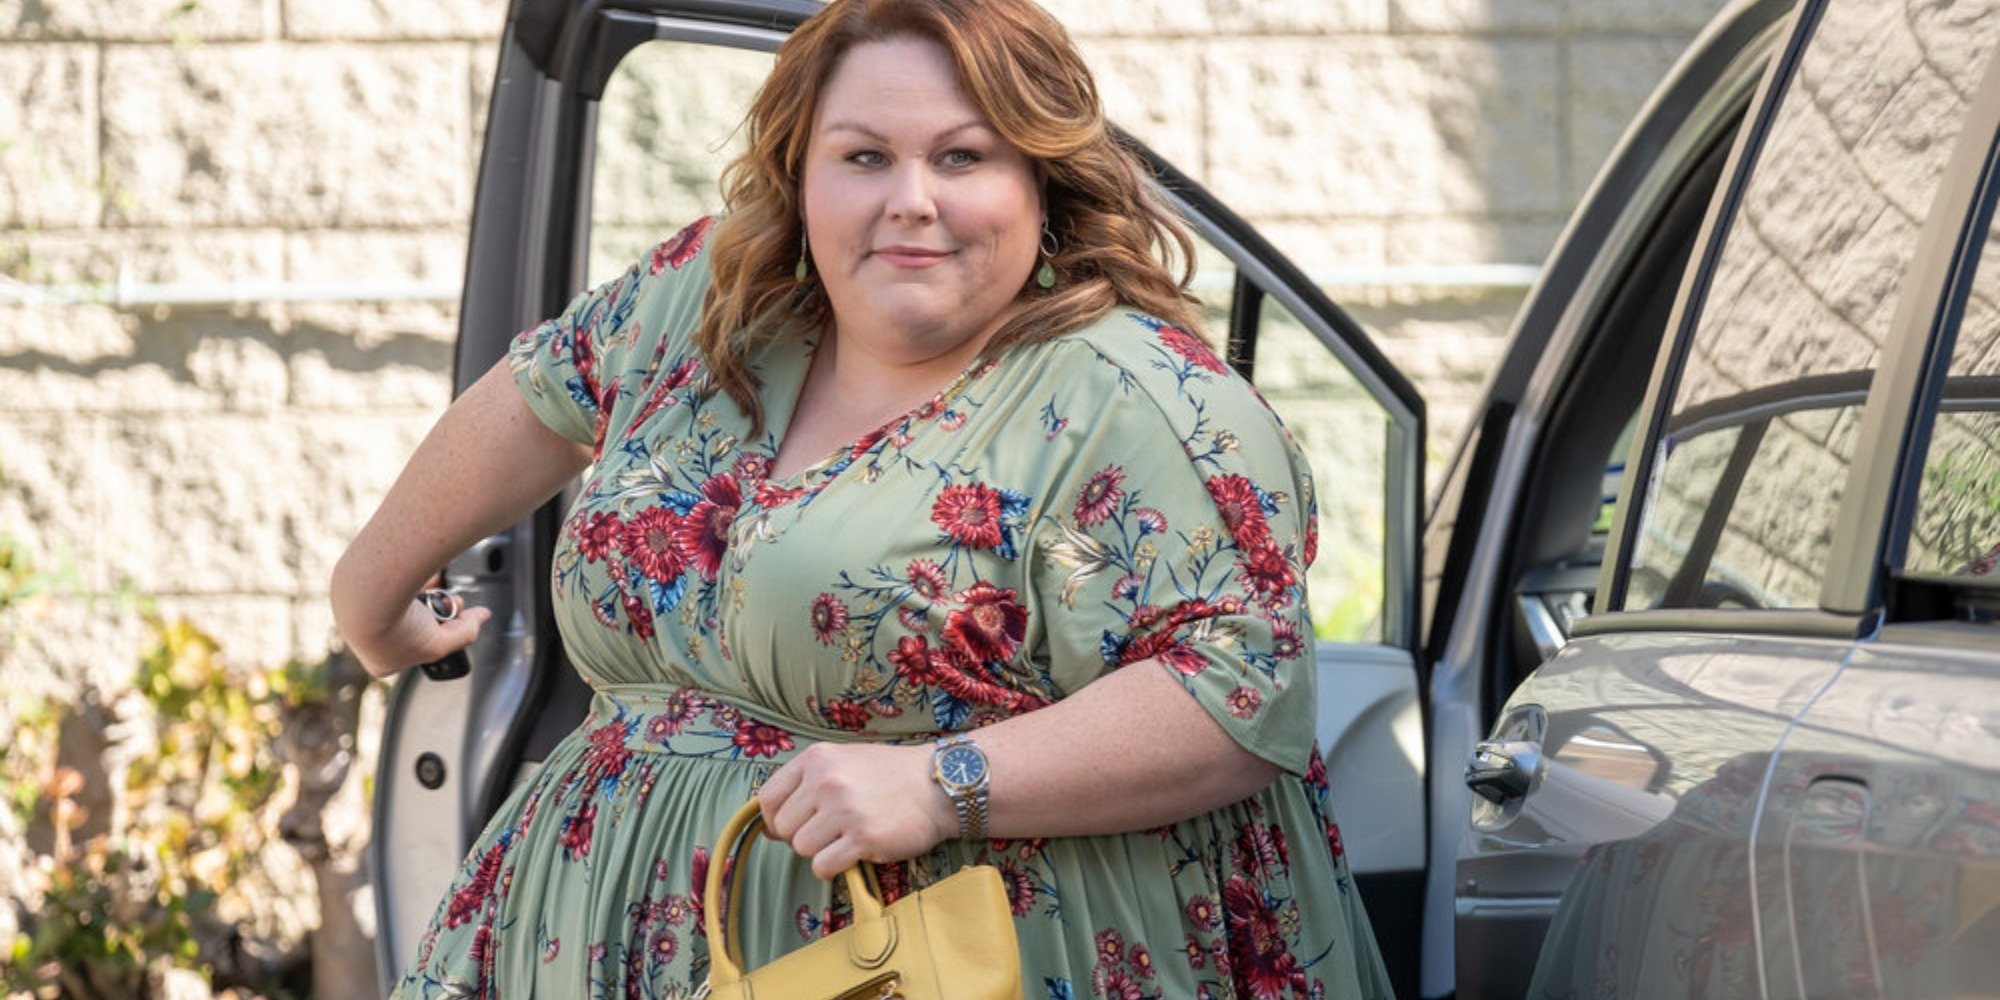 This Is Us star Chrissy Metz stars as Kate Pearson.